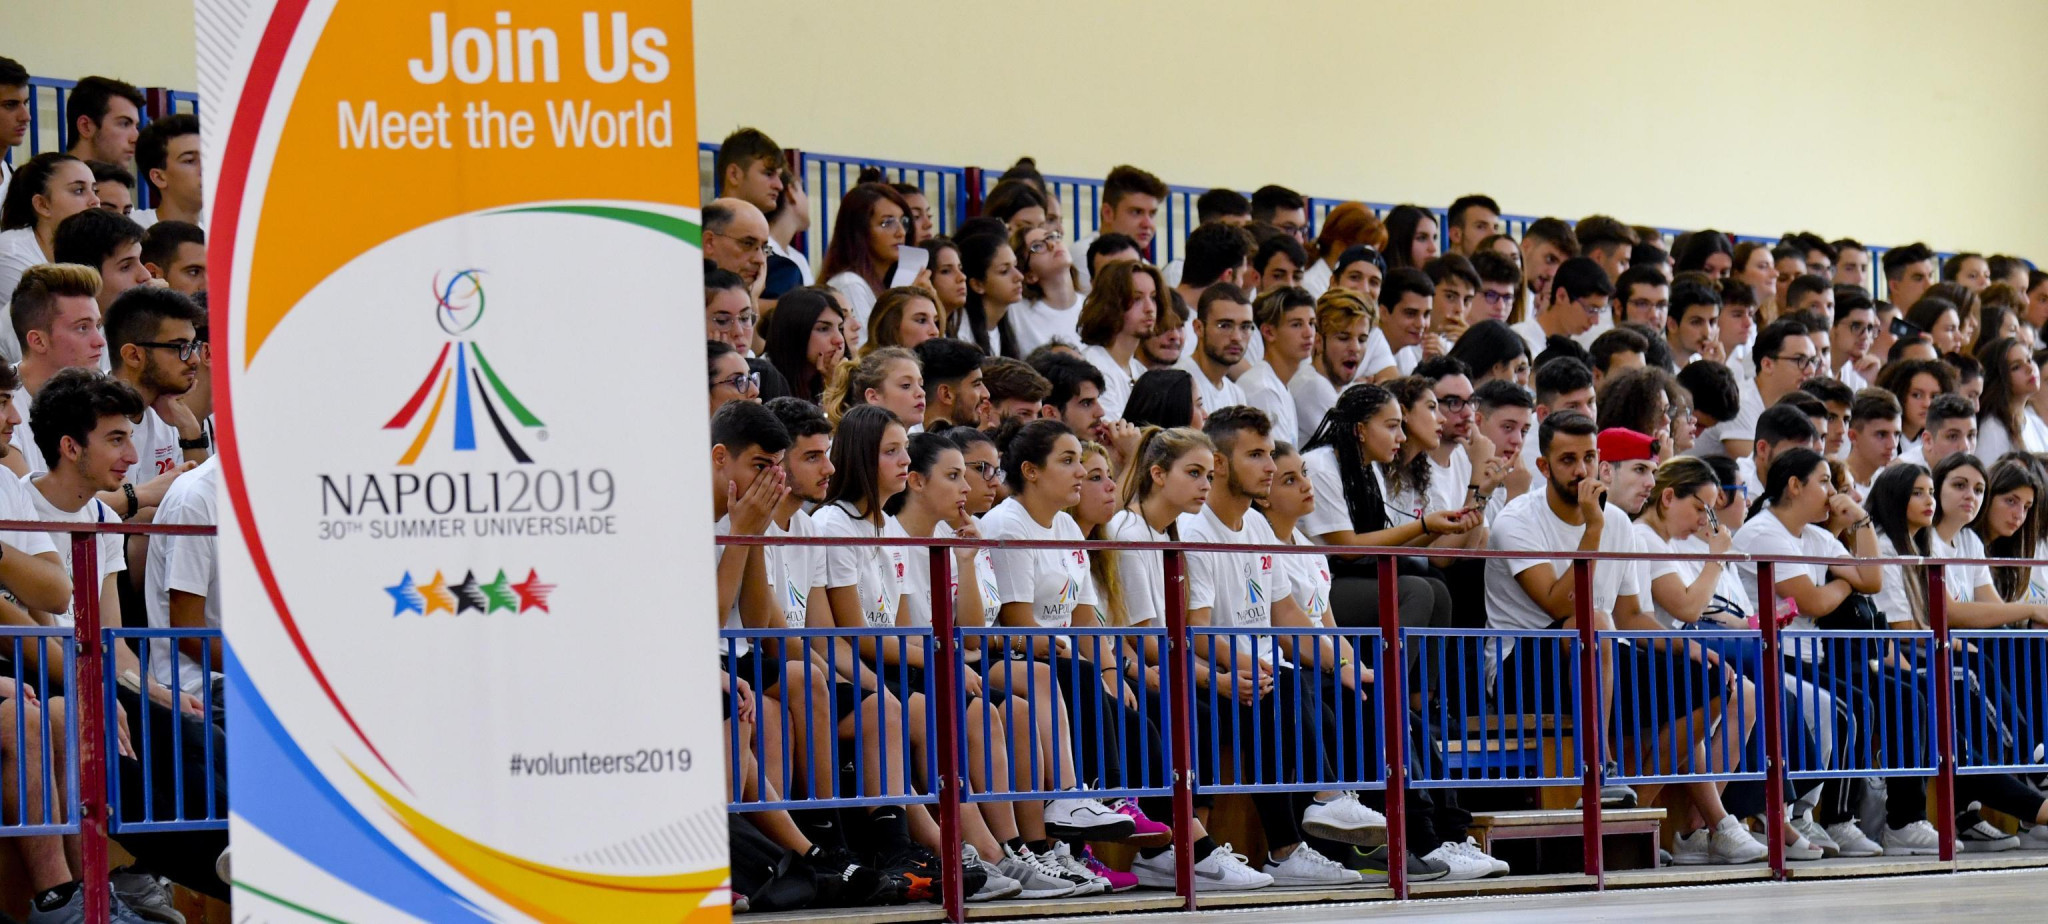 Naples 2019 announces 5,000 volunteer applications received for Summer Universiade